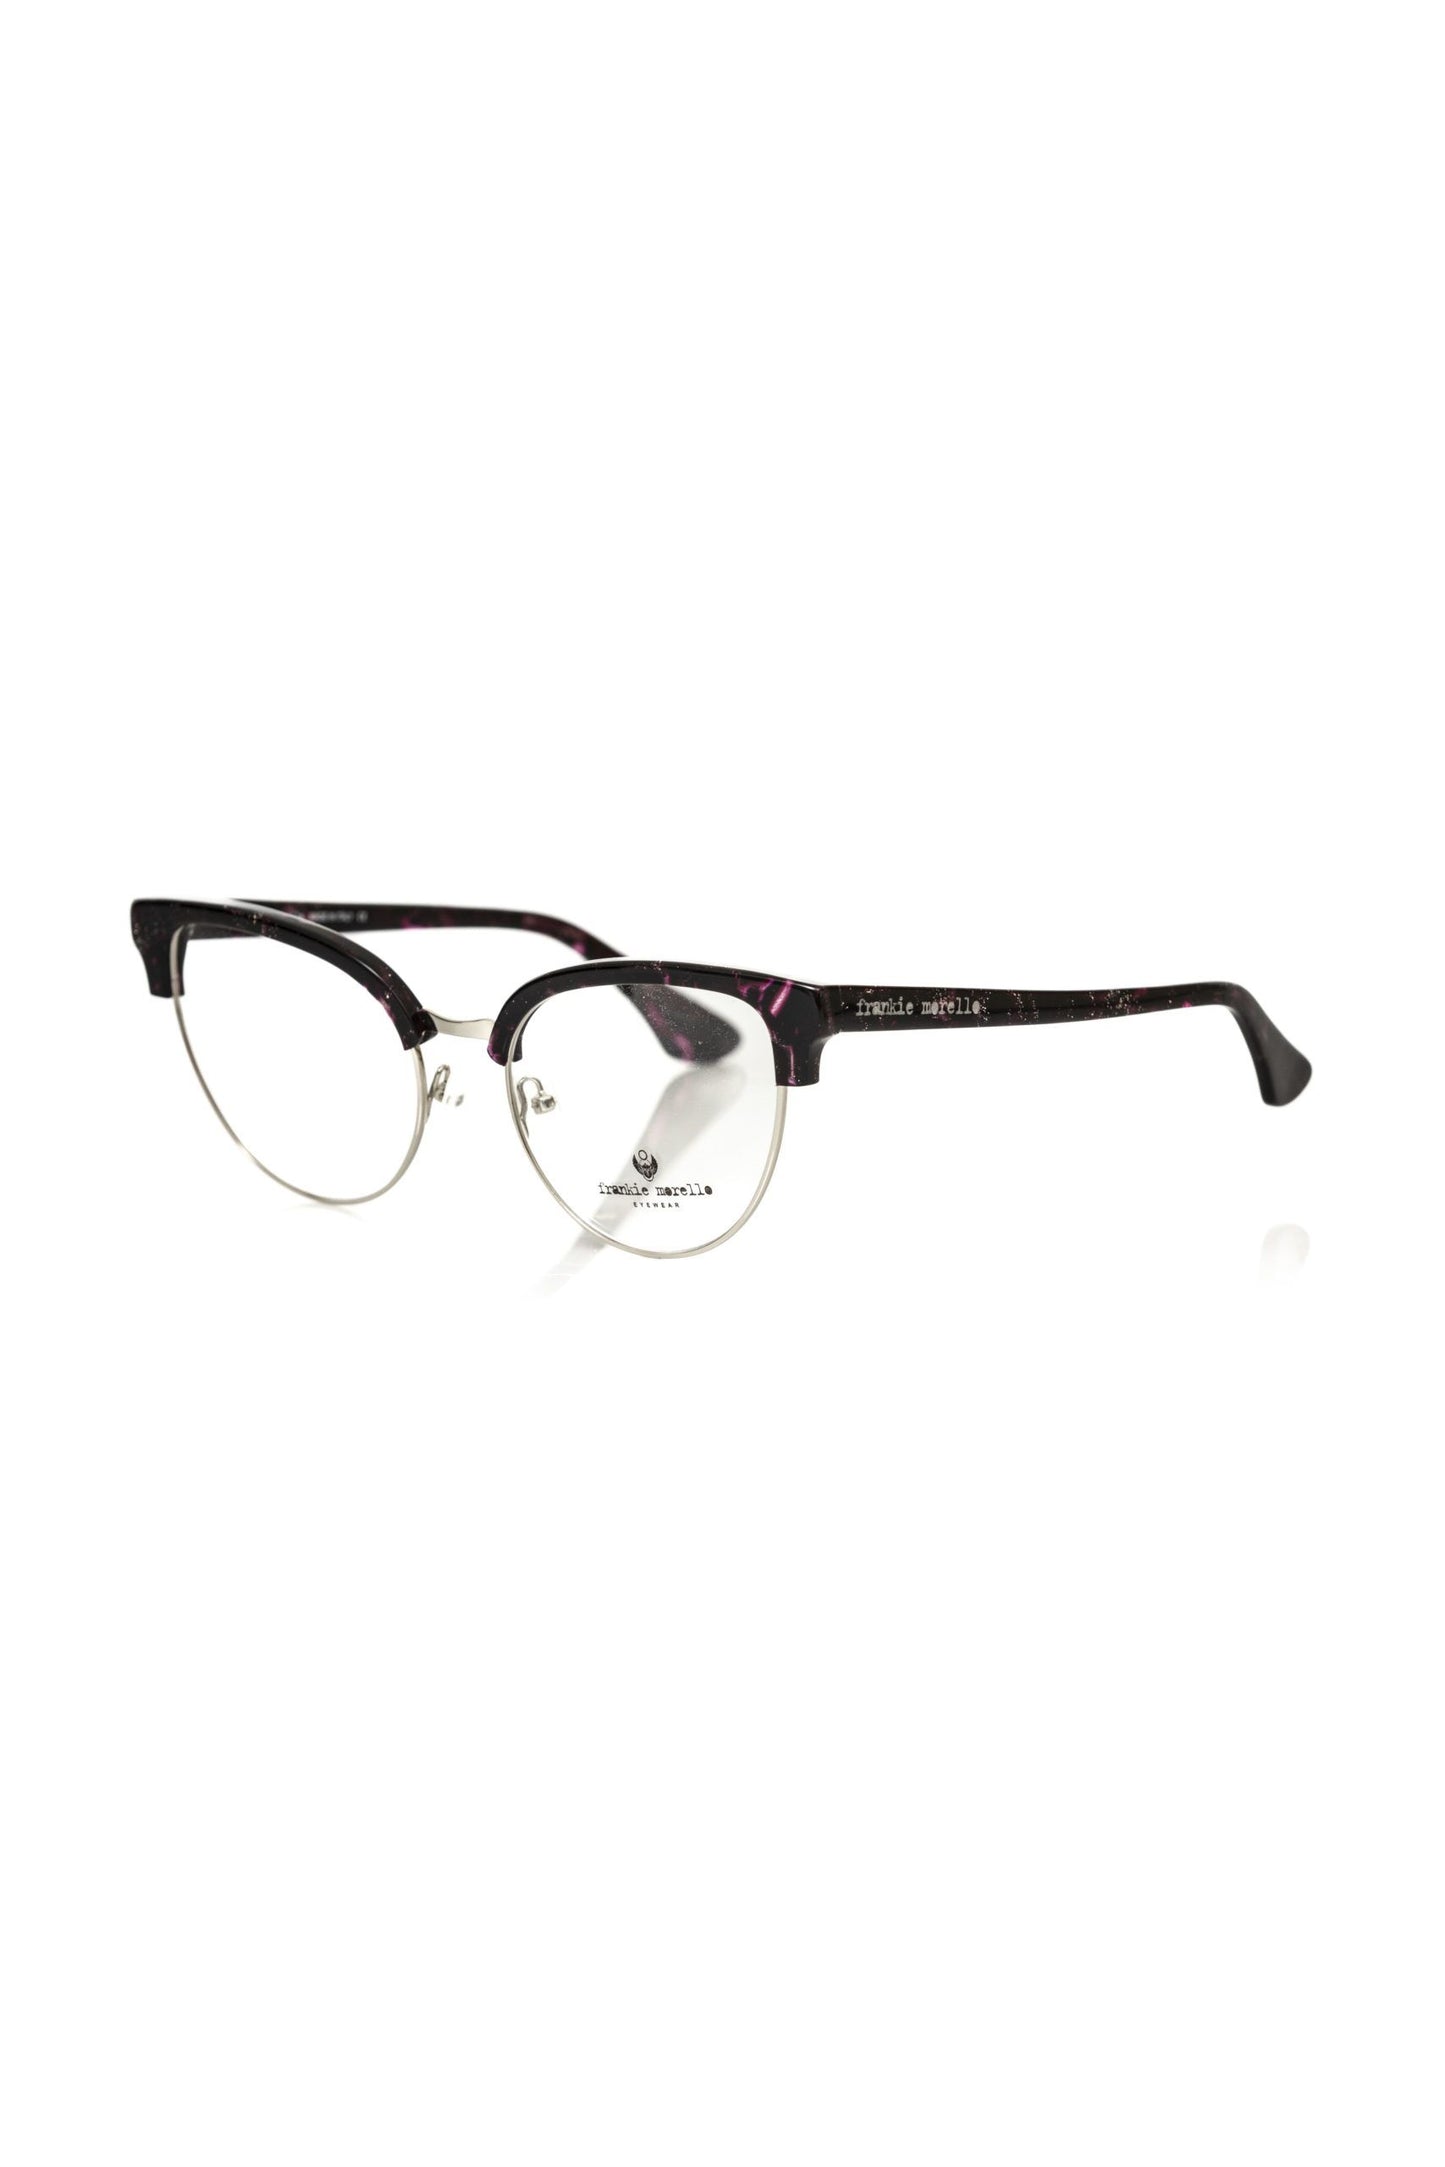 Frankie Morello FRMO-22113 Burgundy Metallic Fibre Frames - Designed by Frankie Morello Available to Buy at a Discounted Price on Moon Behind The Hill Online Designer Discount Store